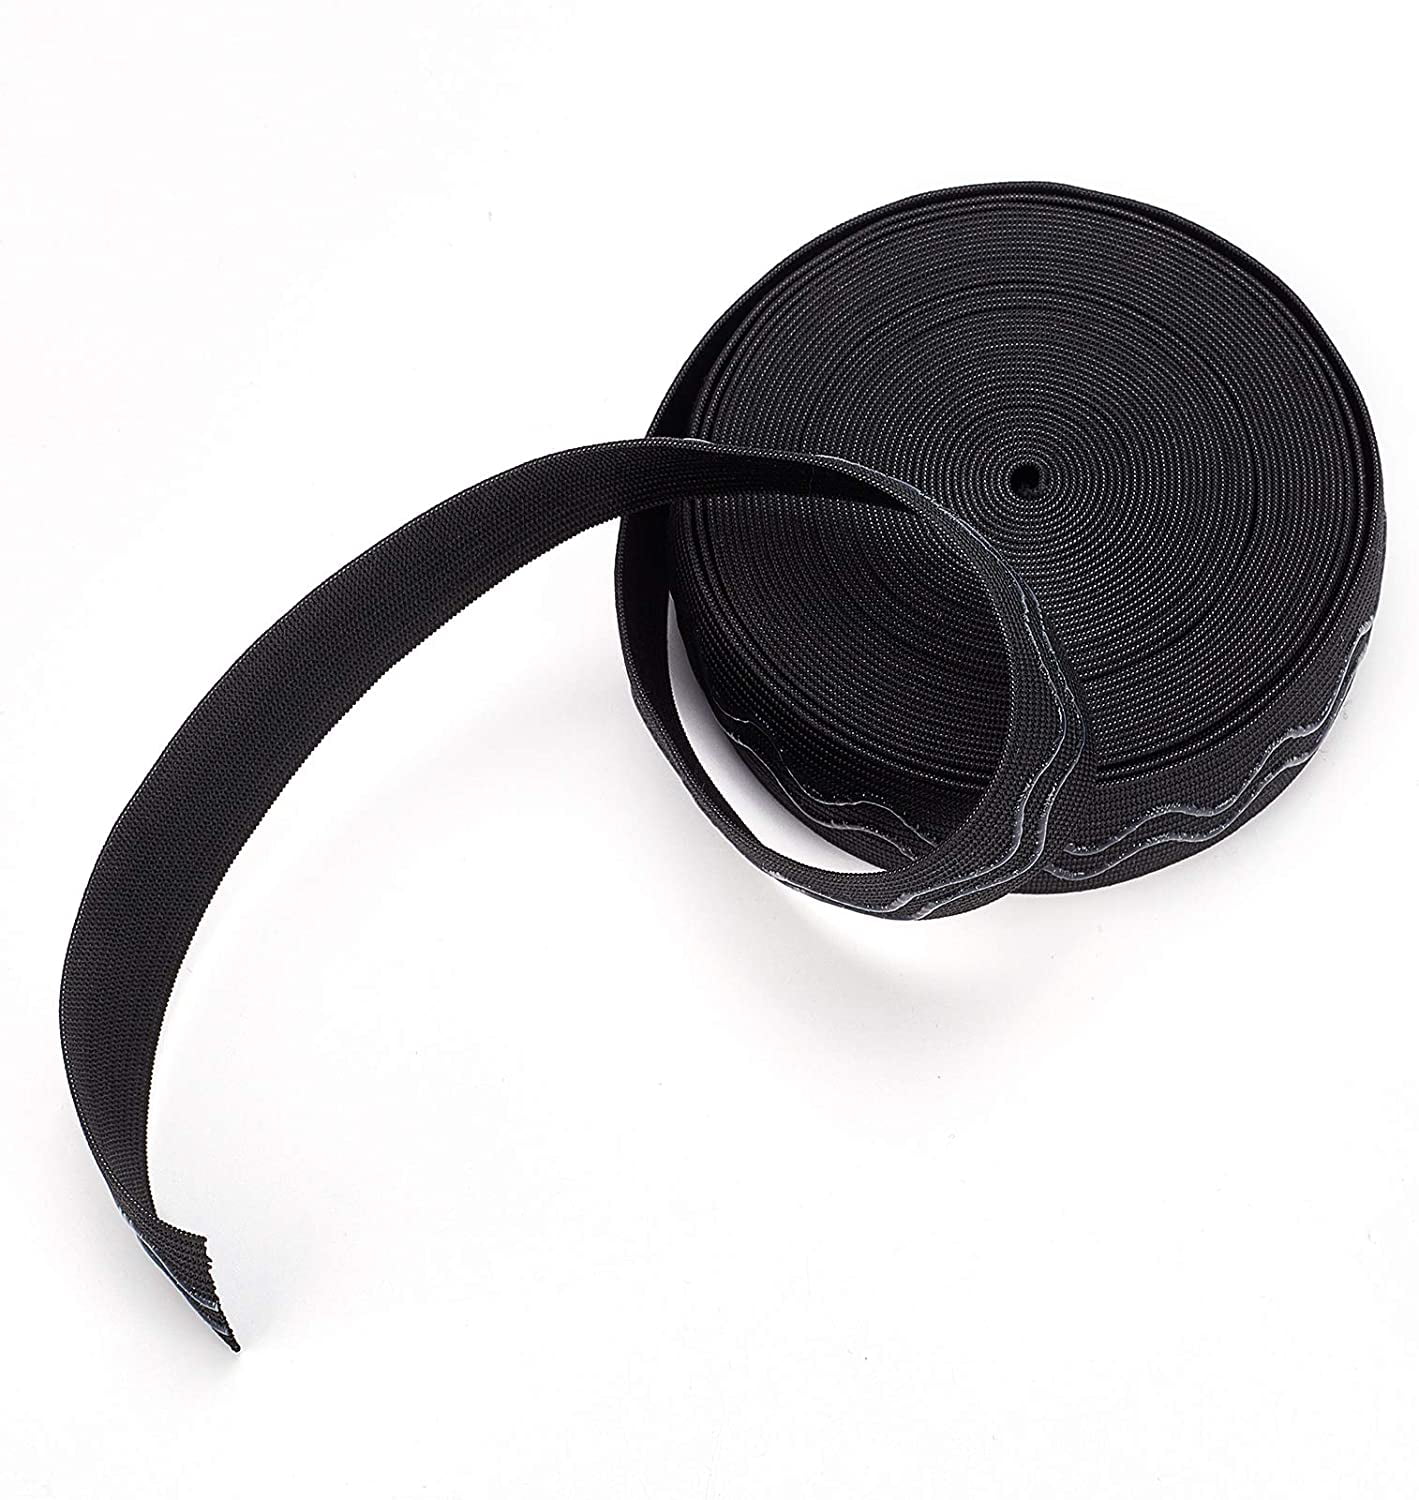  GORGECRAFT 10 Yards Black Non-Slip Silicone Elastic Gripper  Band 0.8 Inch 20mm Wave Gripper Tape Webbing Stretchy Strap Spool Wavy Band  Roll Ribbon Flat Waistband for Clothing Garment Shorts Project 